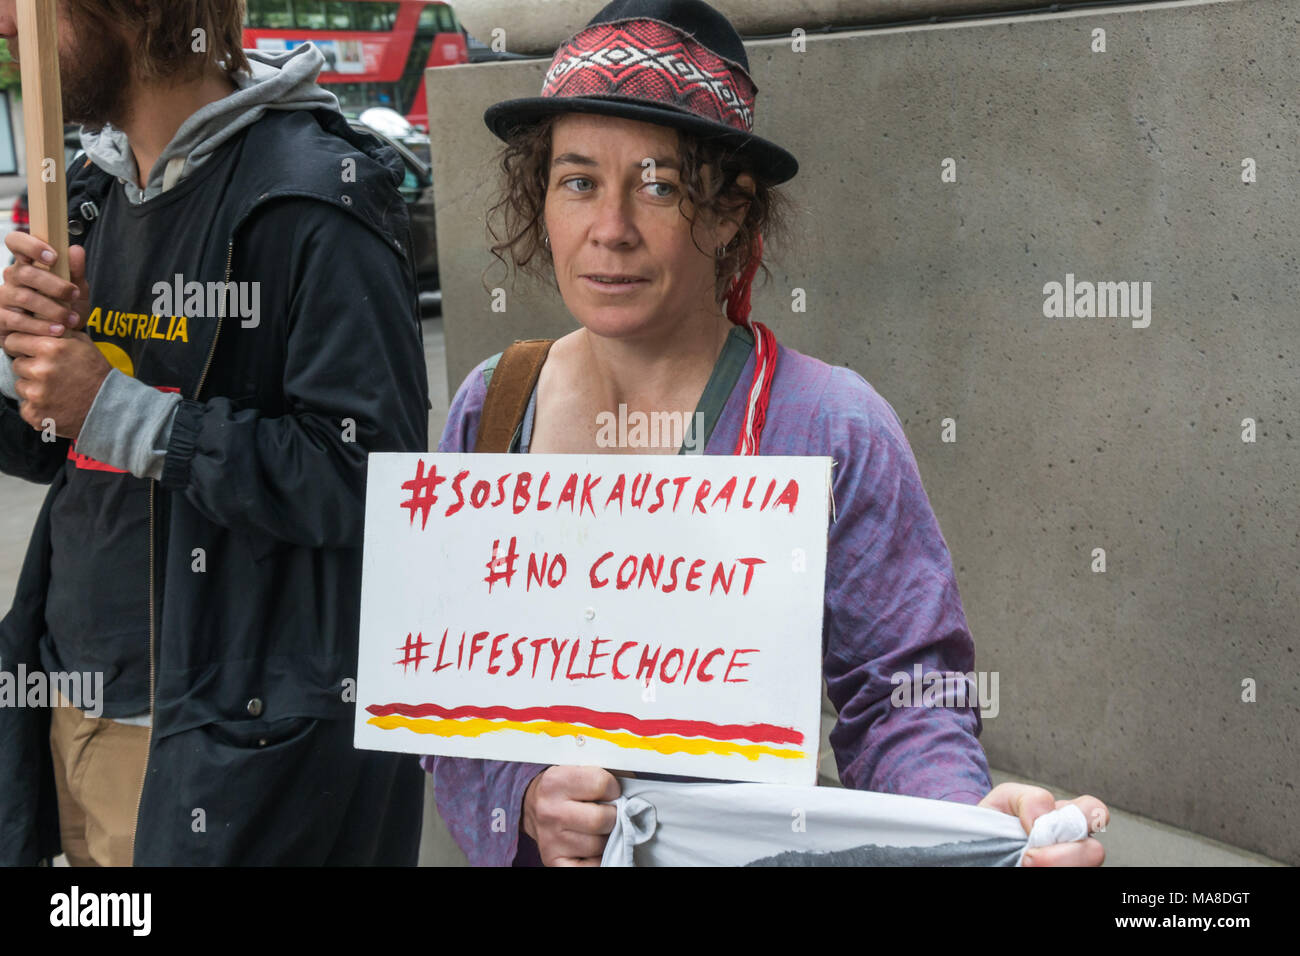 A placard with 3 hashtags at the protest at Australia House, London demanding an end to forced closure of Aborigine Communities, #sosblakaustralia, #noconsent and #lifestylechoice, a reference to the dismissal of their rights by PM Tony Abbott. Stock Photo